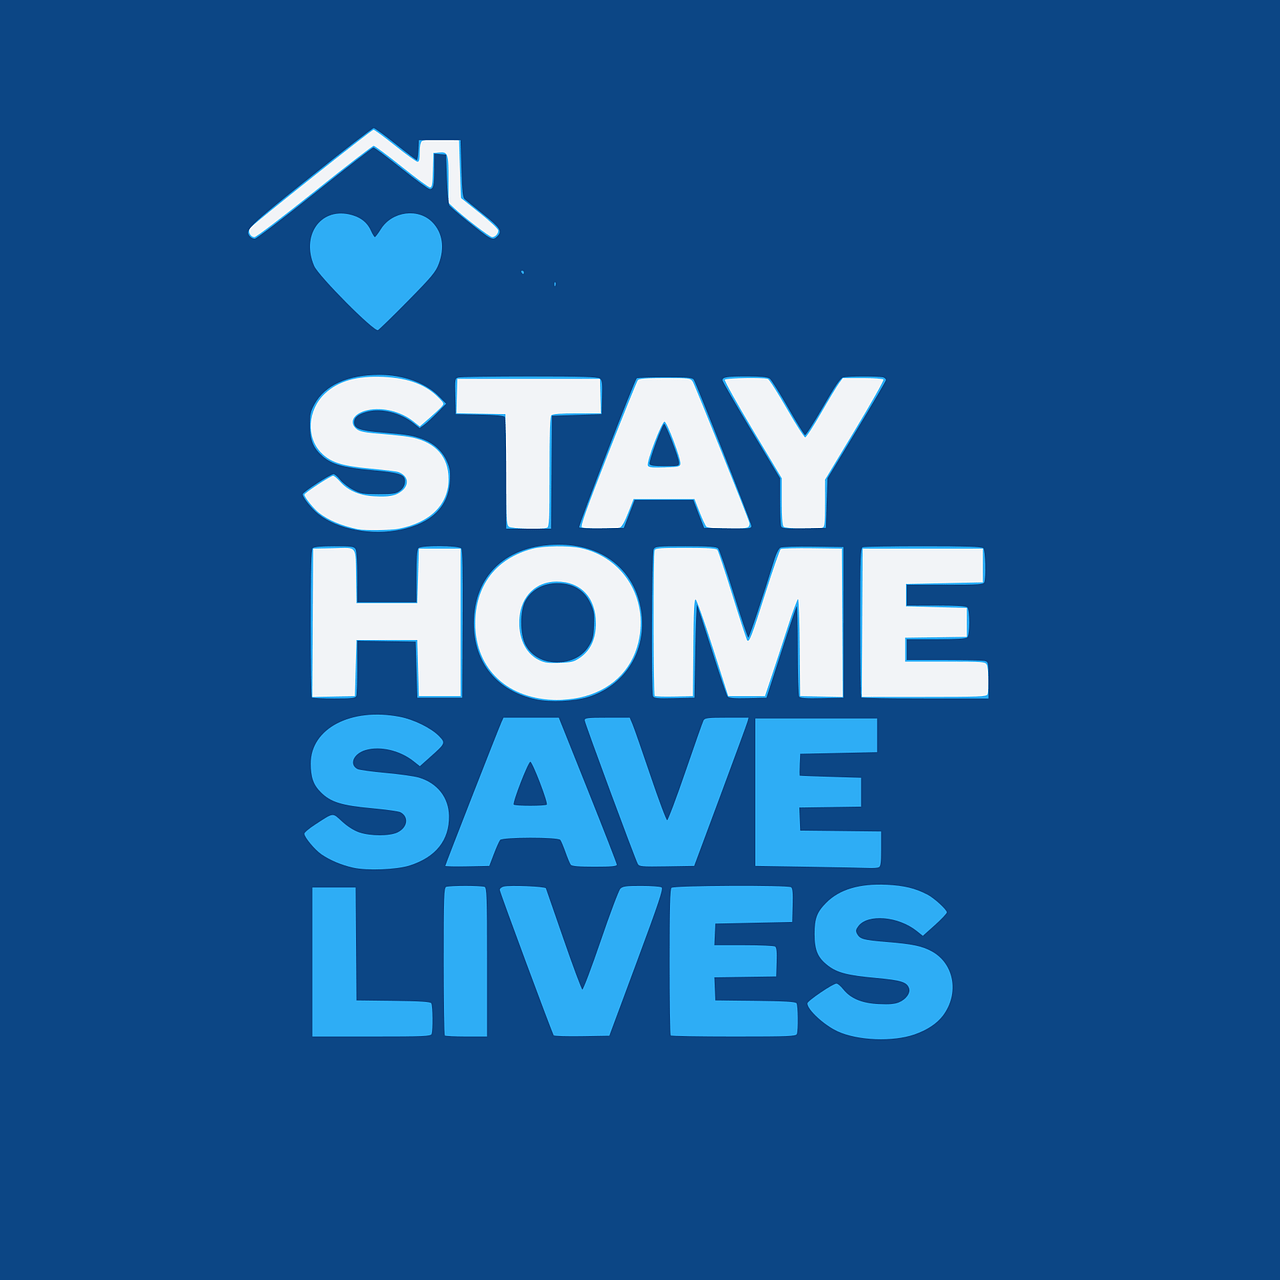 Stay Home Save Lives -Santosh Yoga Institute